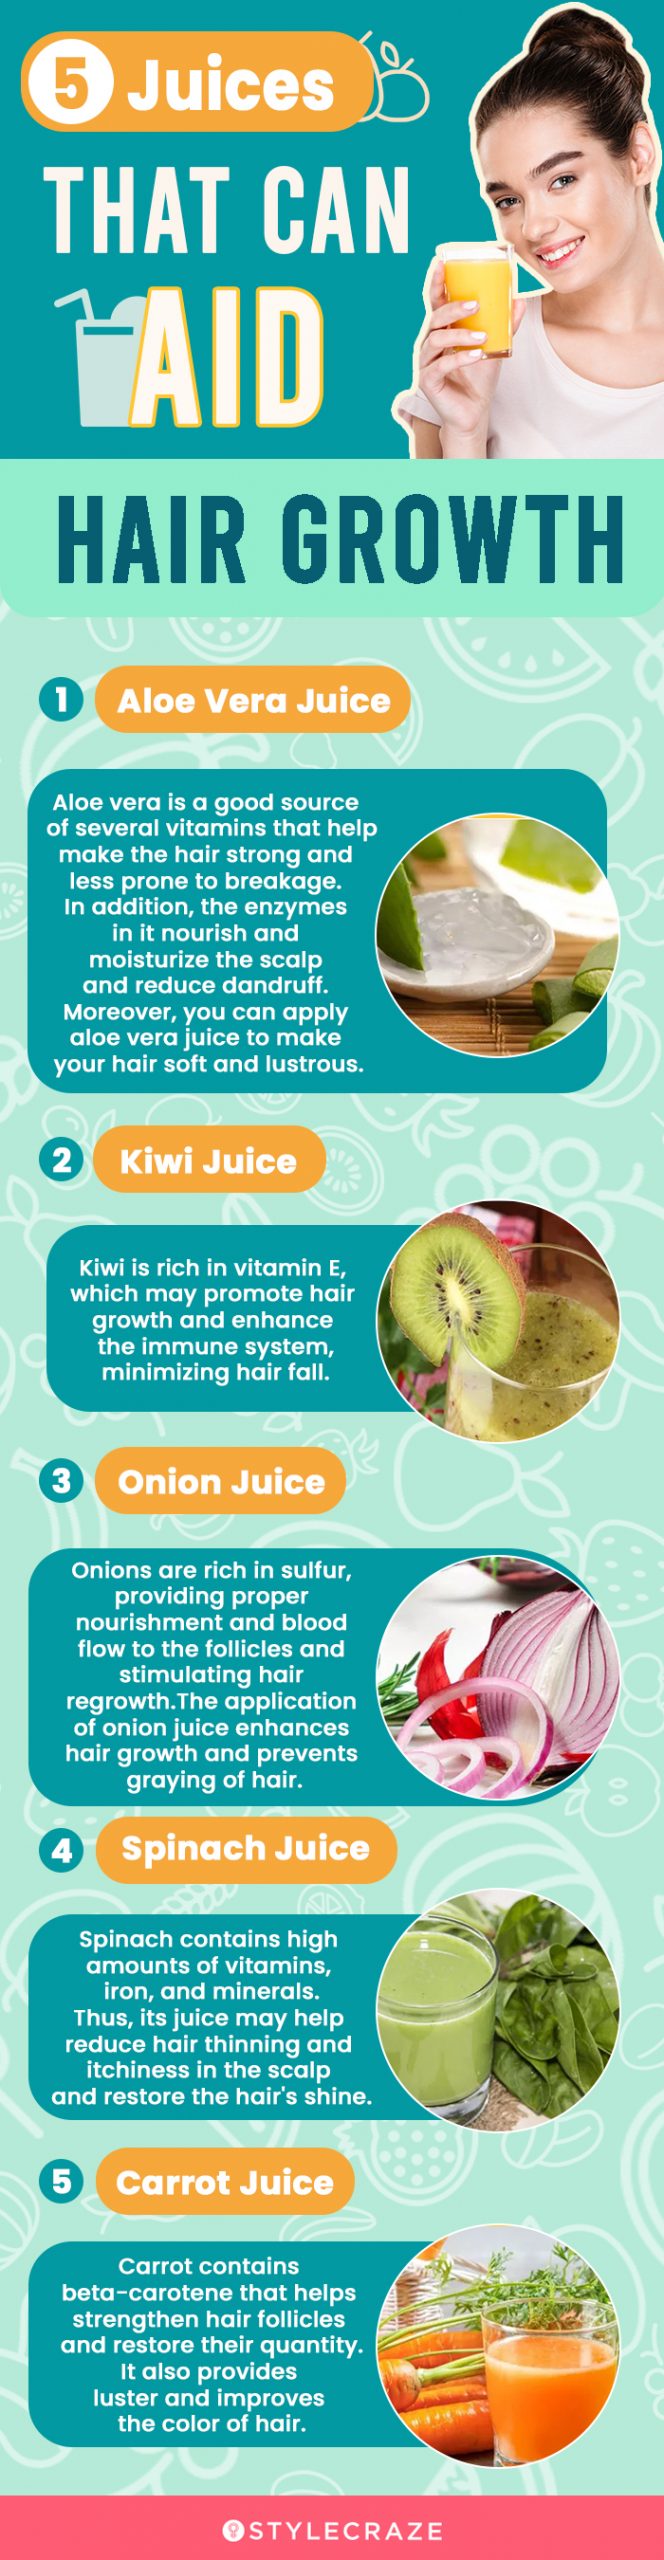 most effective juices for hair growth (infographic)